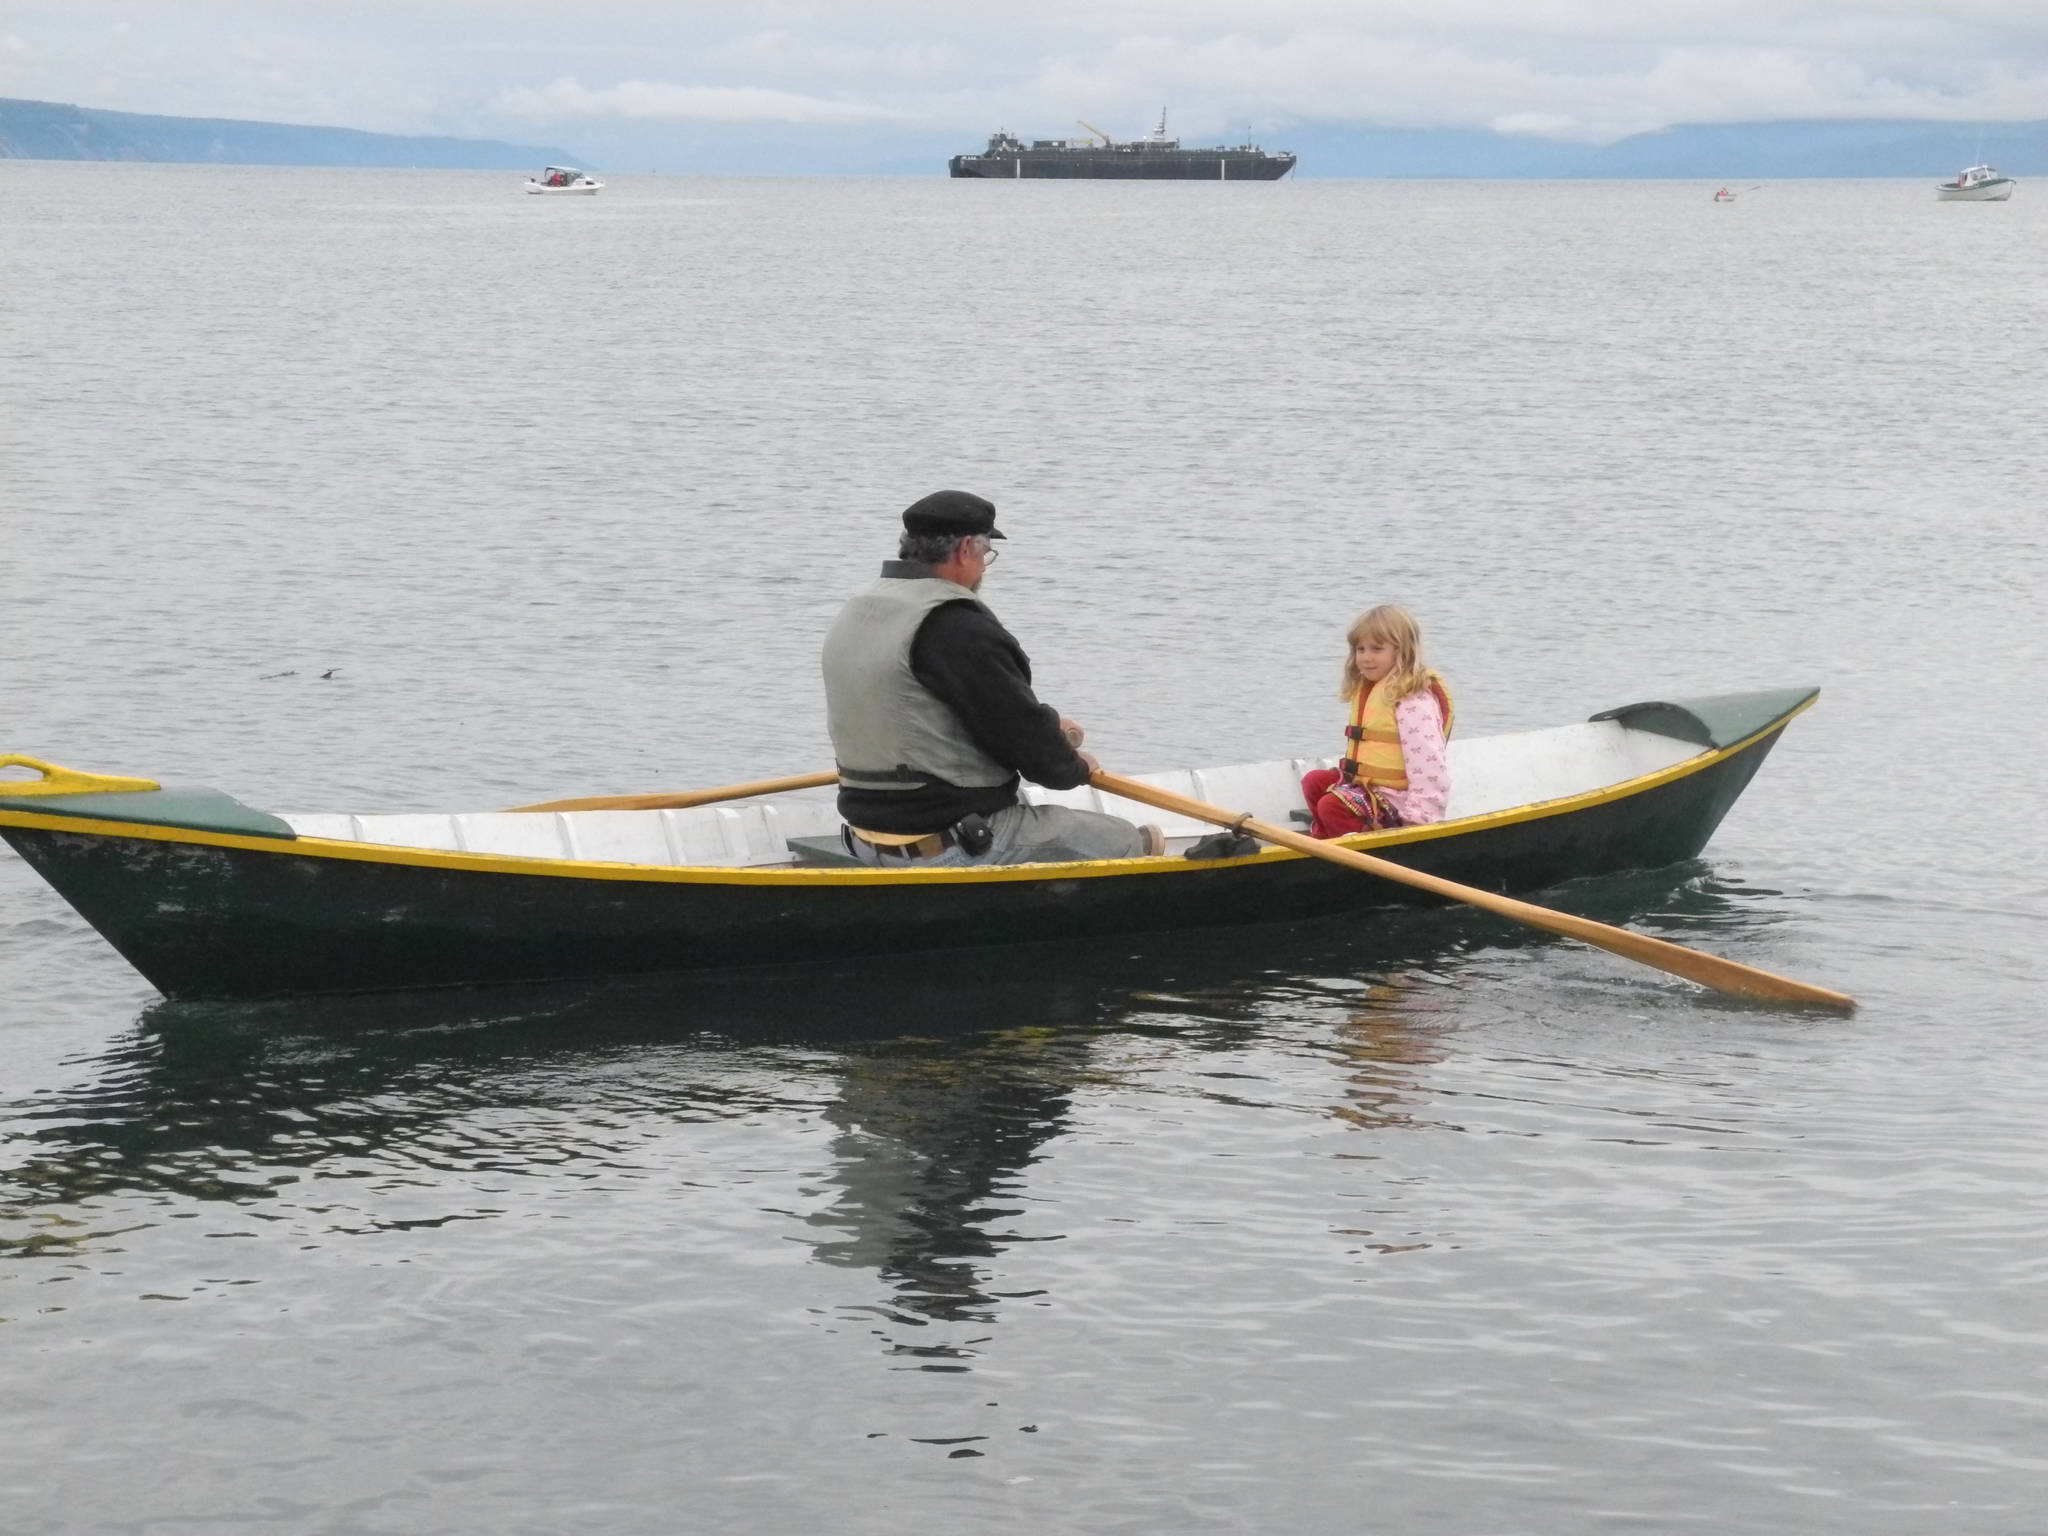 Bumppo Bremicker takes his granddaughter, Zoe Bremicker, for a ride at a previous Kachemak Bay Wooden Boat Festival. (Homer News file photo)